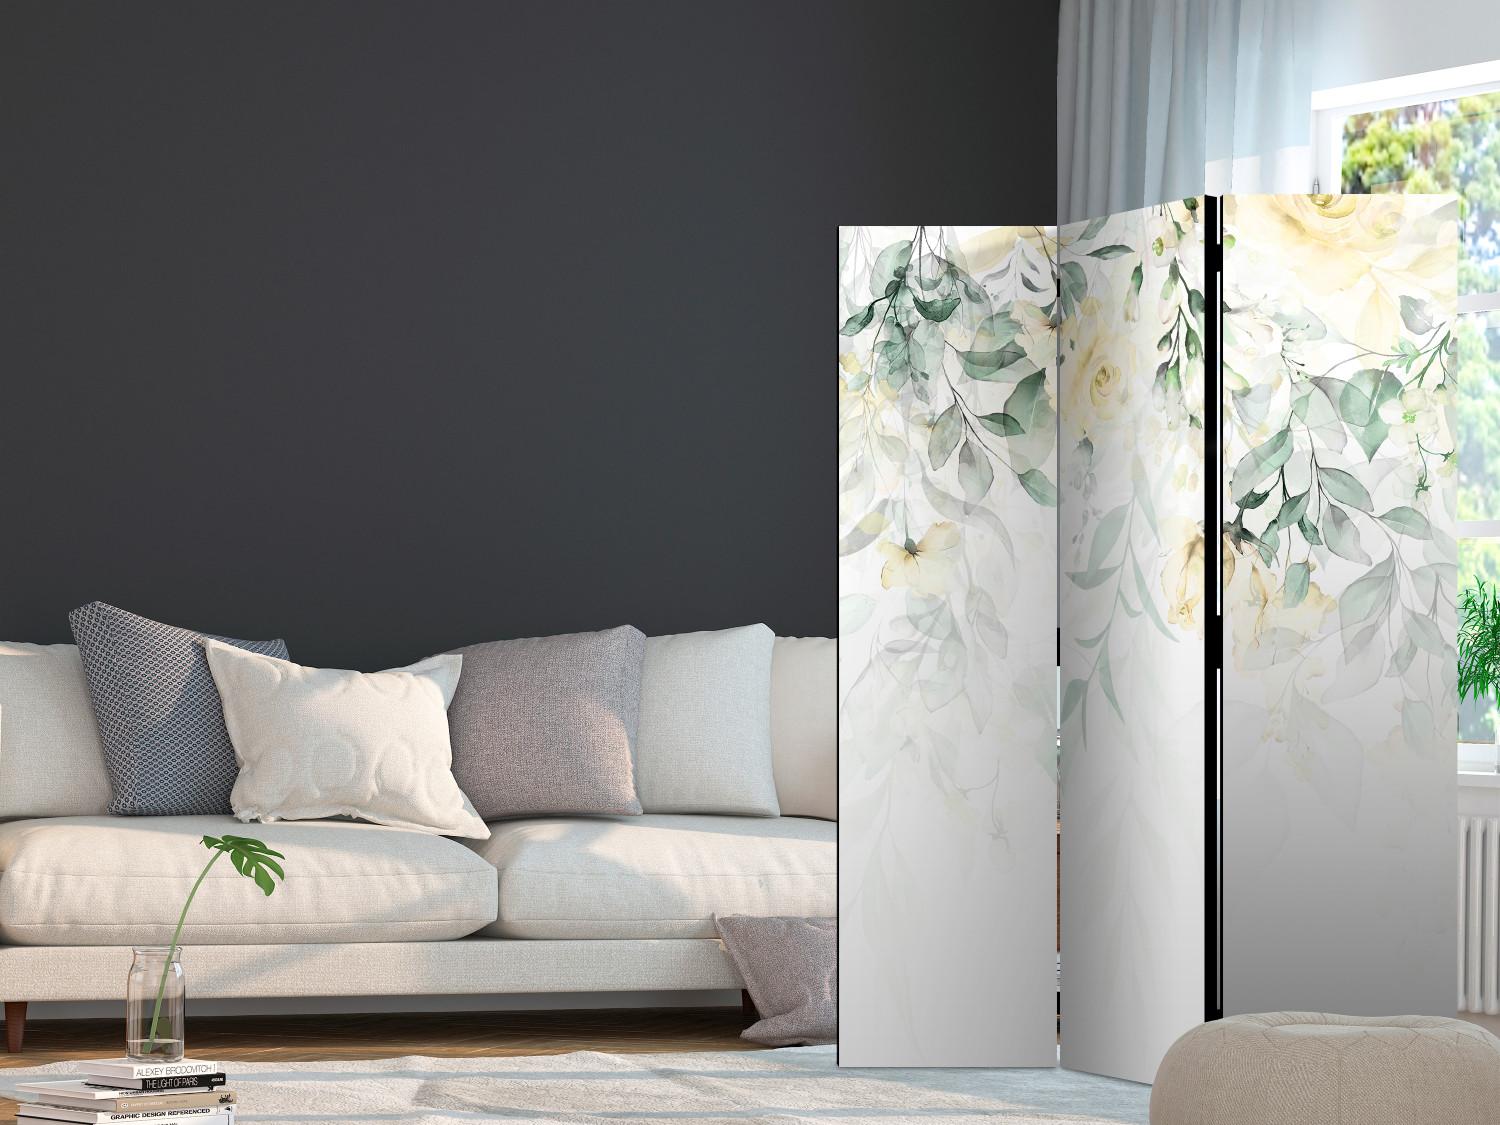 Room Divider Rose Waterfall - Second Variant (3-piece) - Yellow flowers amidst plants